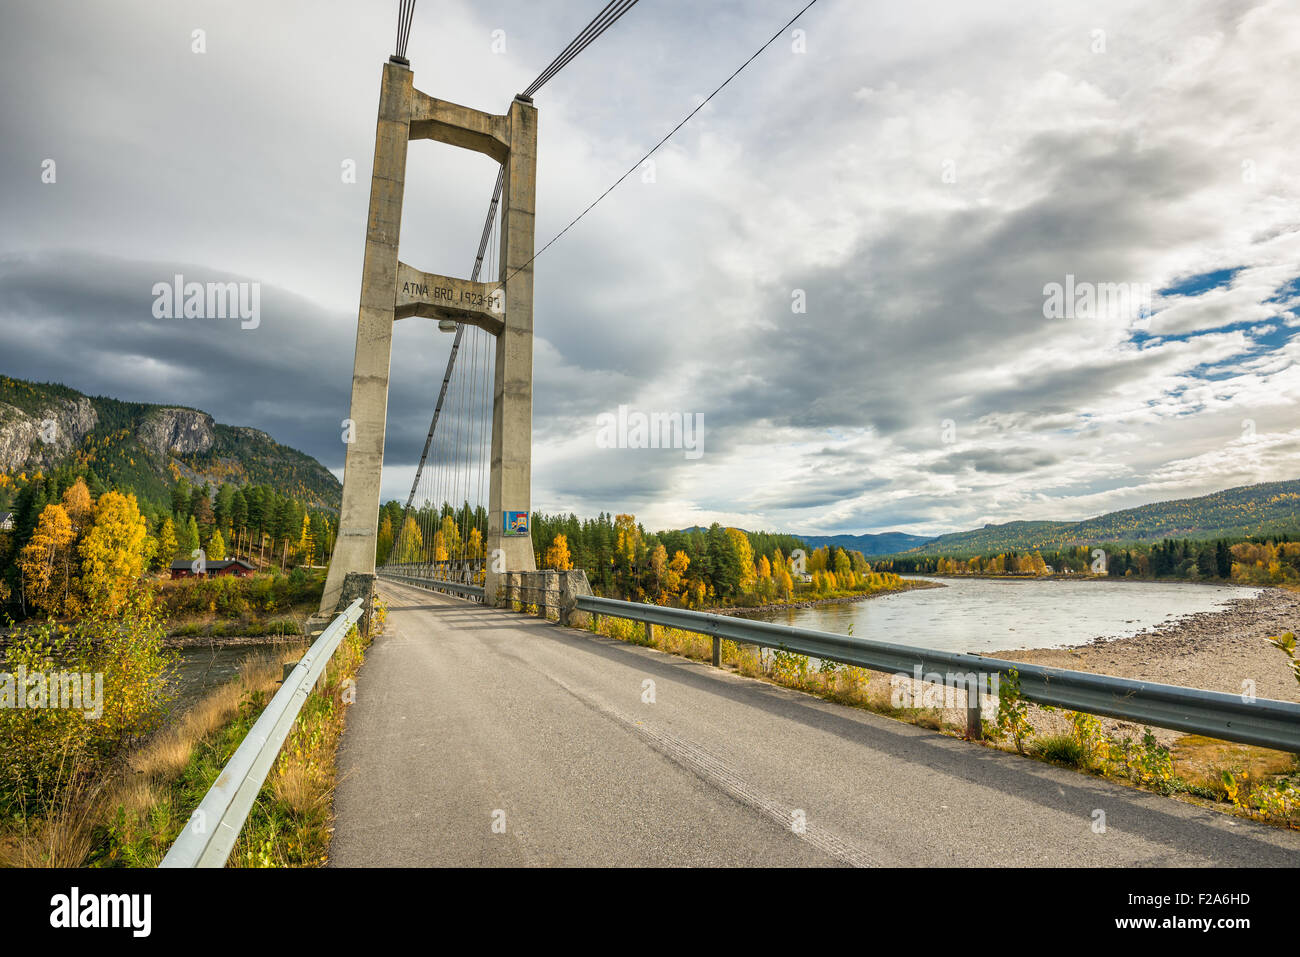 Bridge over the Glomma River leading to Atna village in the Stor-Elvdal municipality, Hedmark county, Norway. Stock Photo